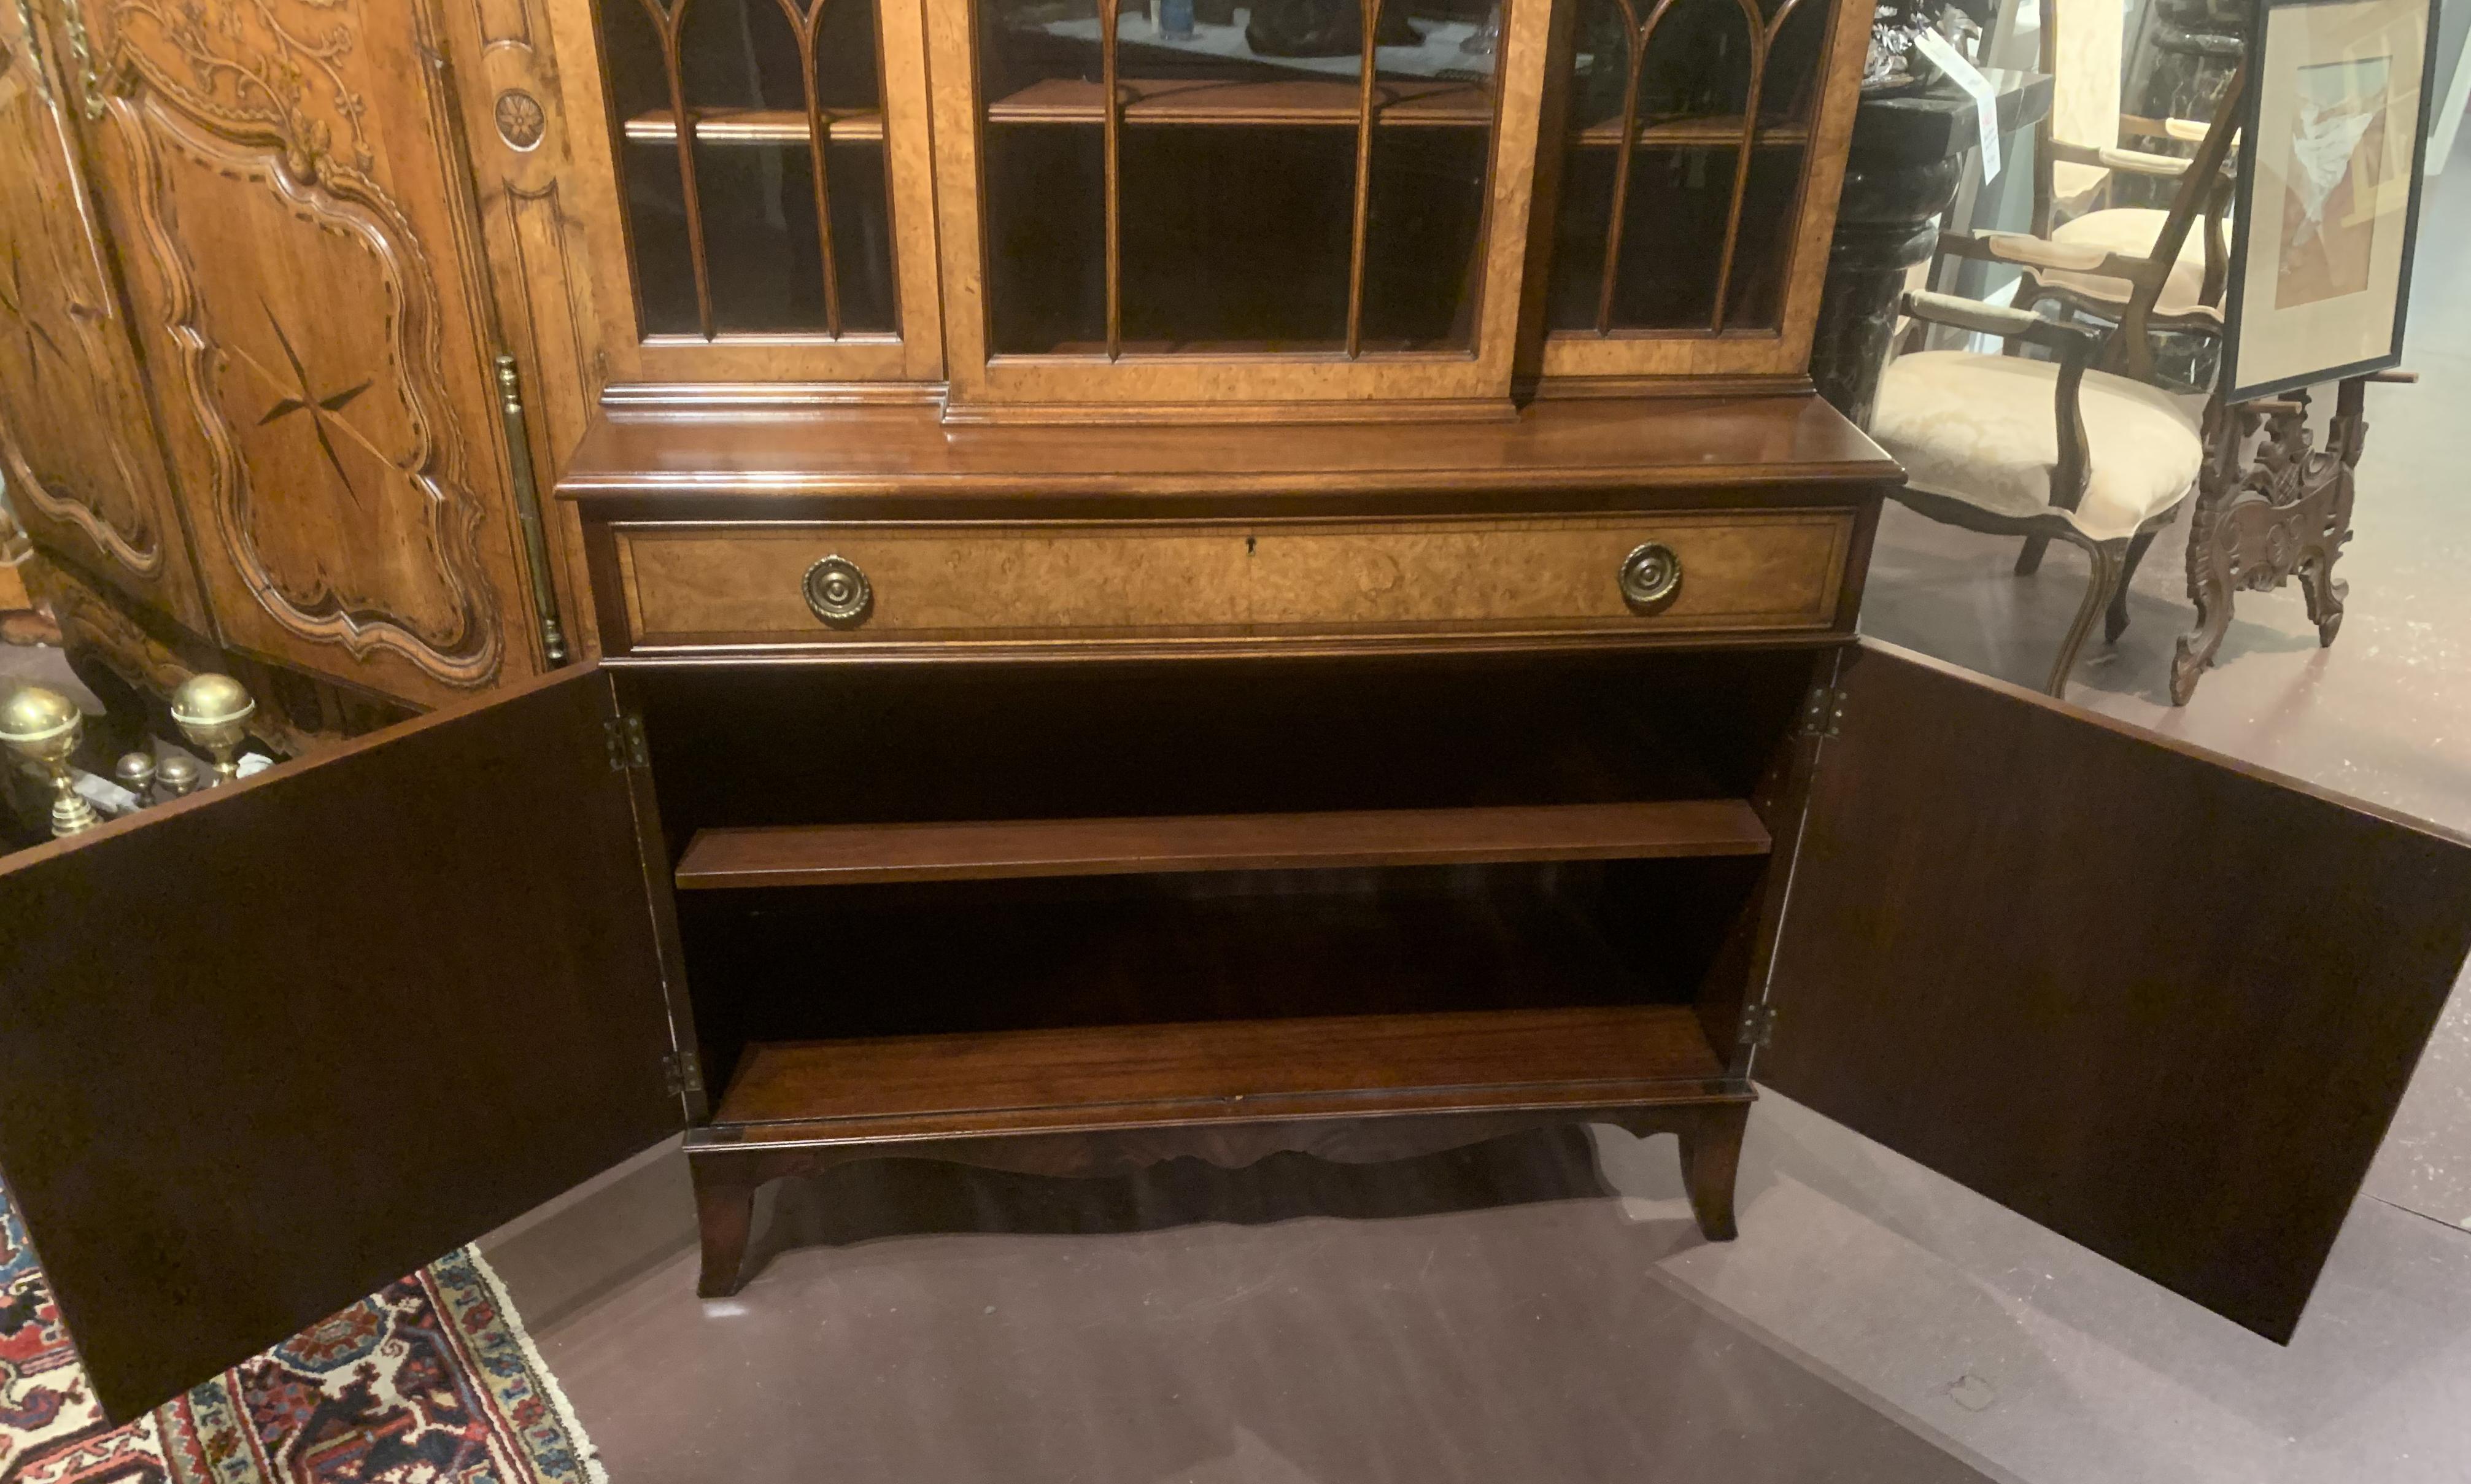 20th Century Diminutive Adam Style Breakfront Bookcase or China Cabinet by F&G Furniture Co